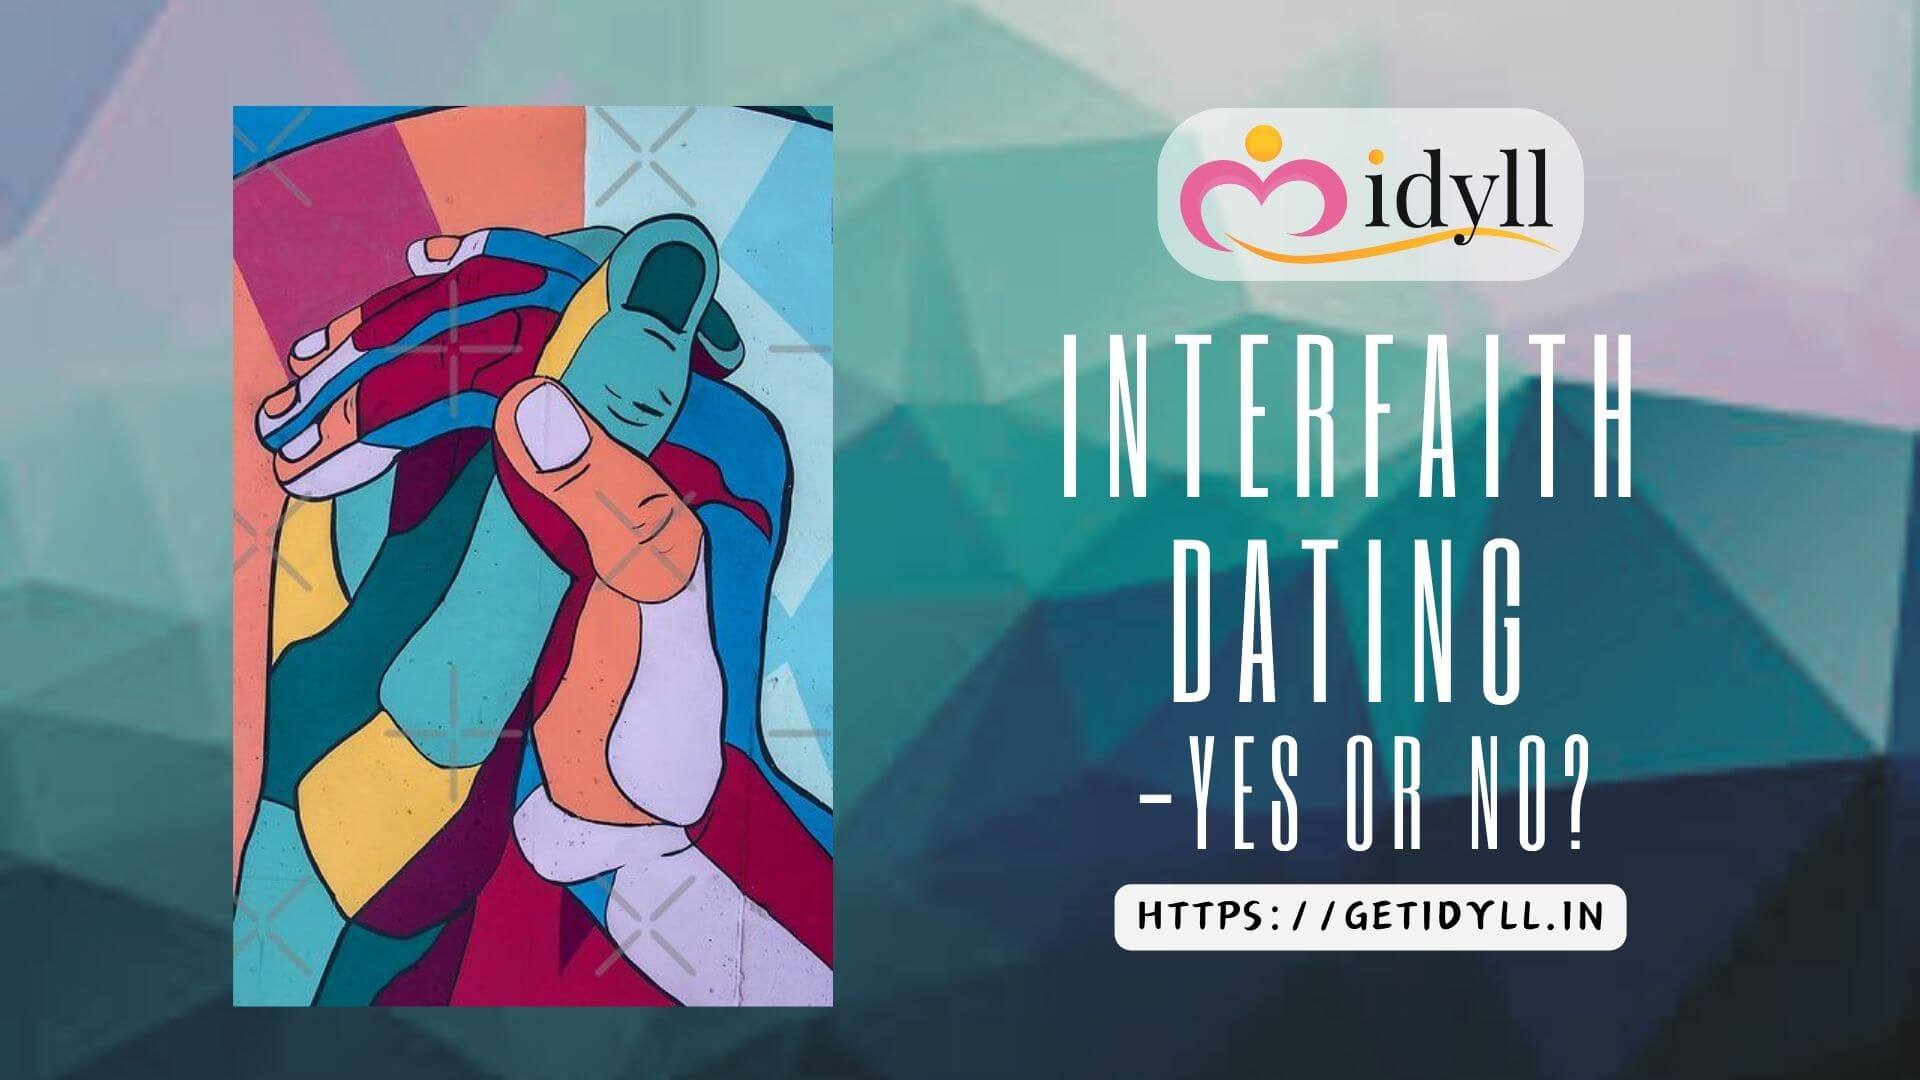 idyll, dating, interfaith dating, love, dating advice, relationships